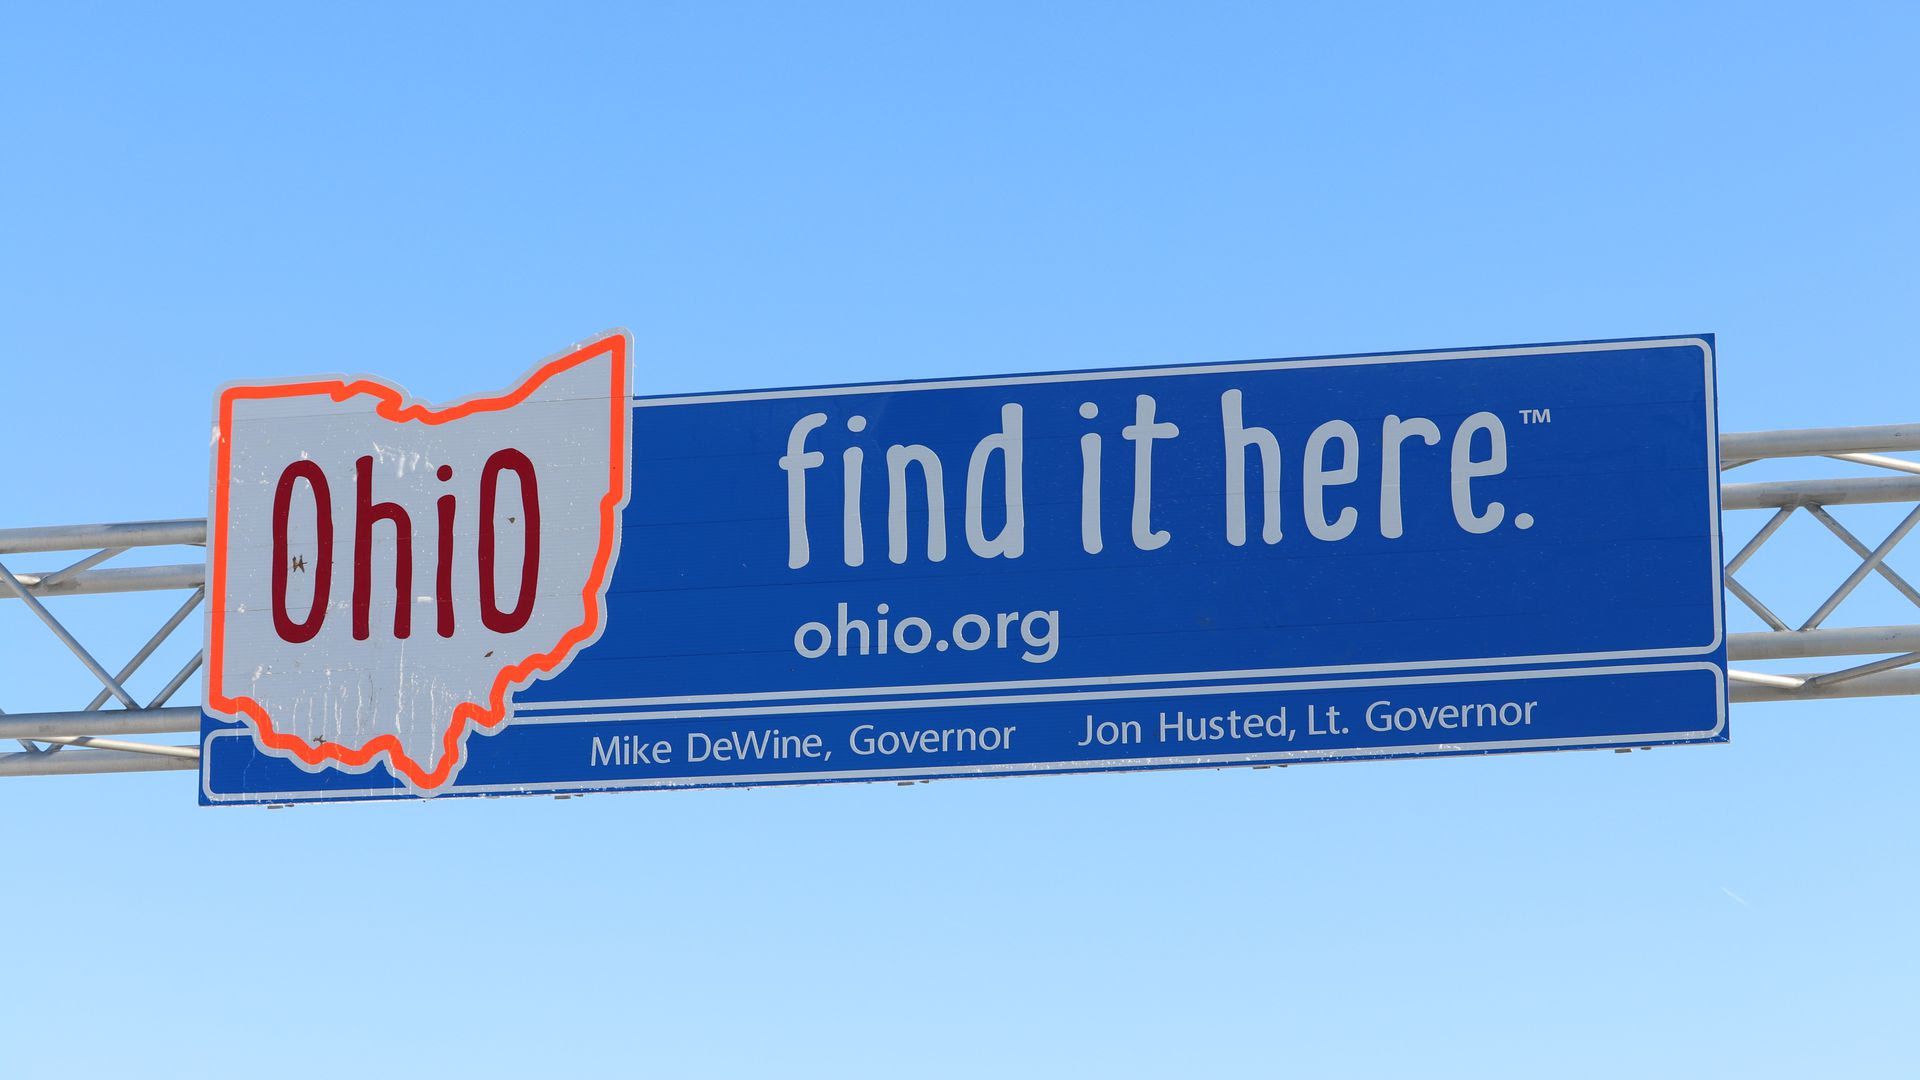 A state welcome sign for Ohio reading: "find it here."